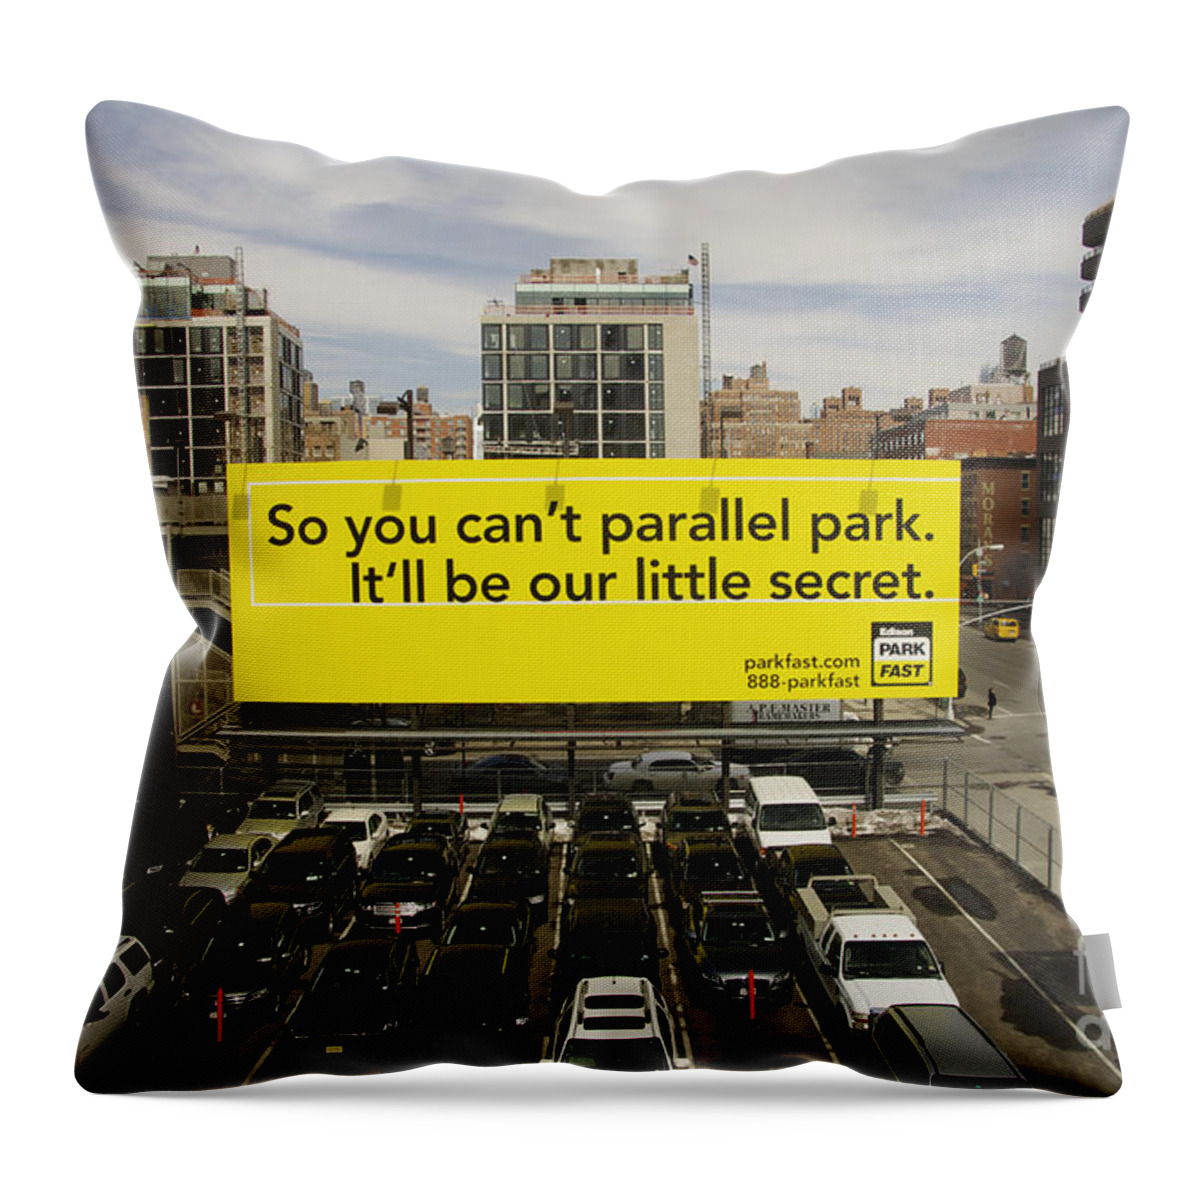 Cars Throw Pillow featuring the photograph Car Park Avenue by Scott Evers